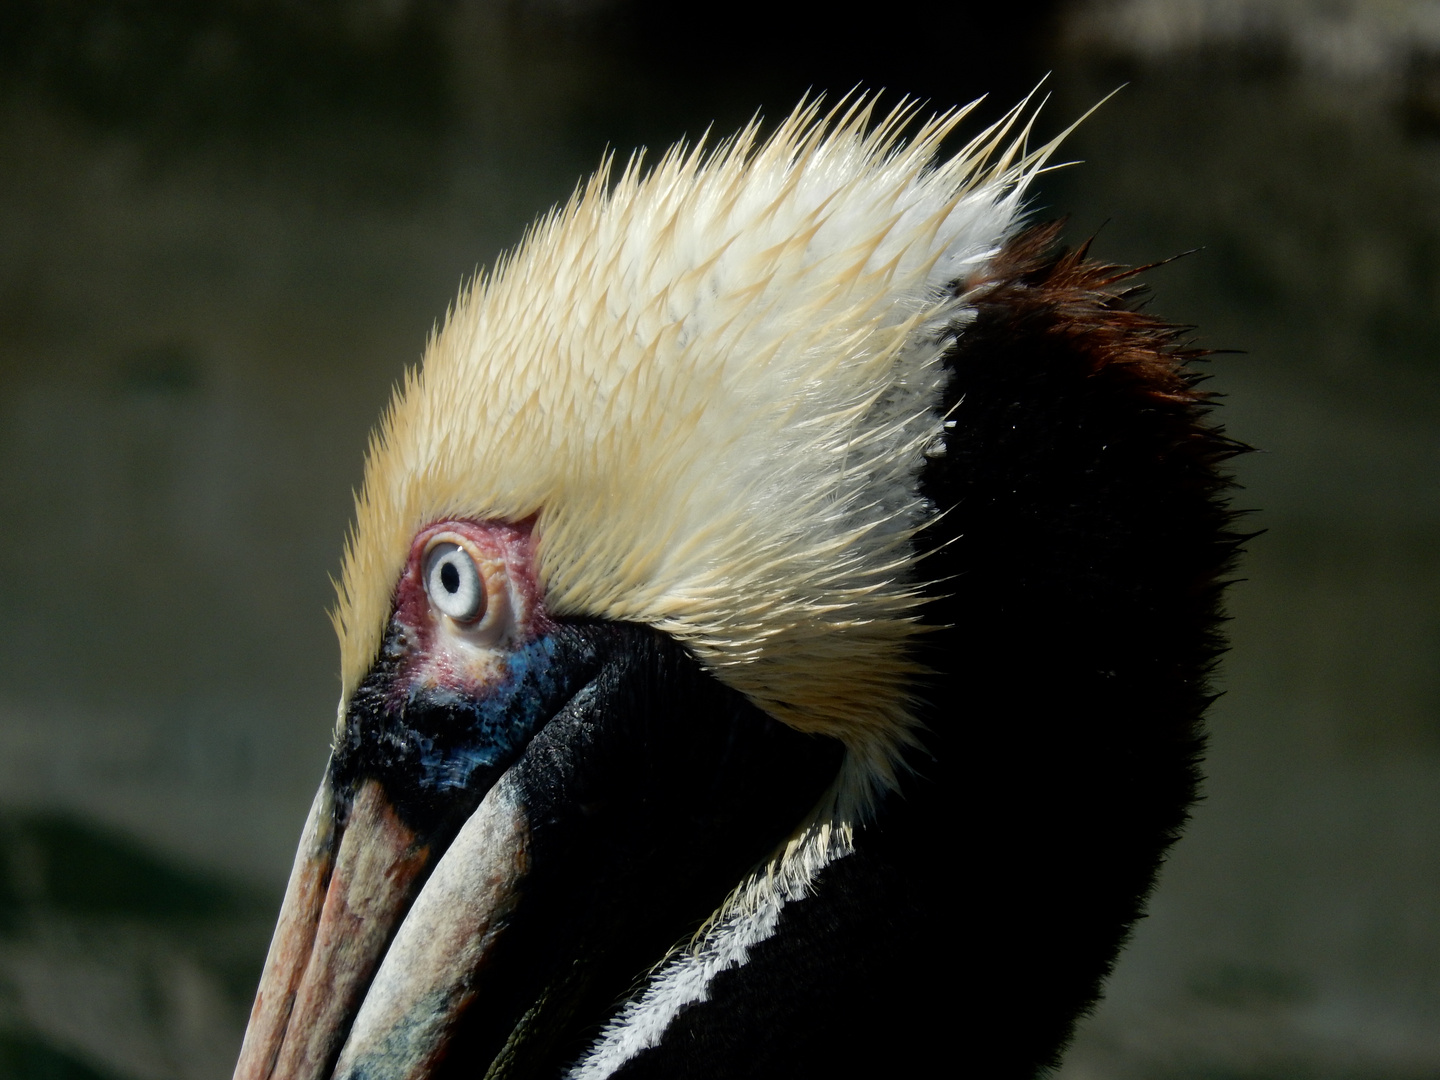 The eye of the pelican...